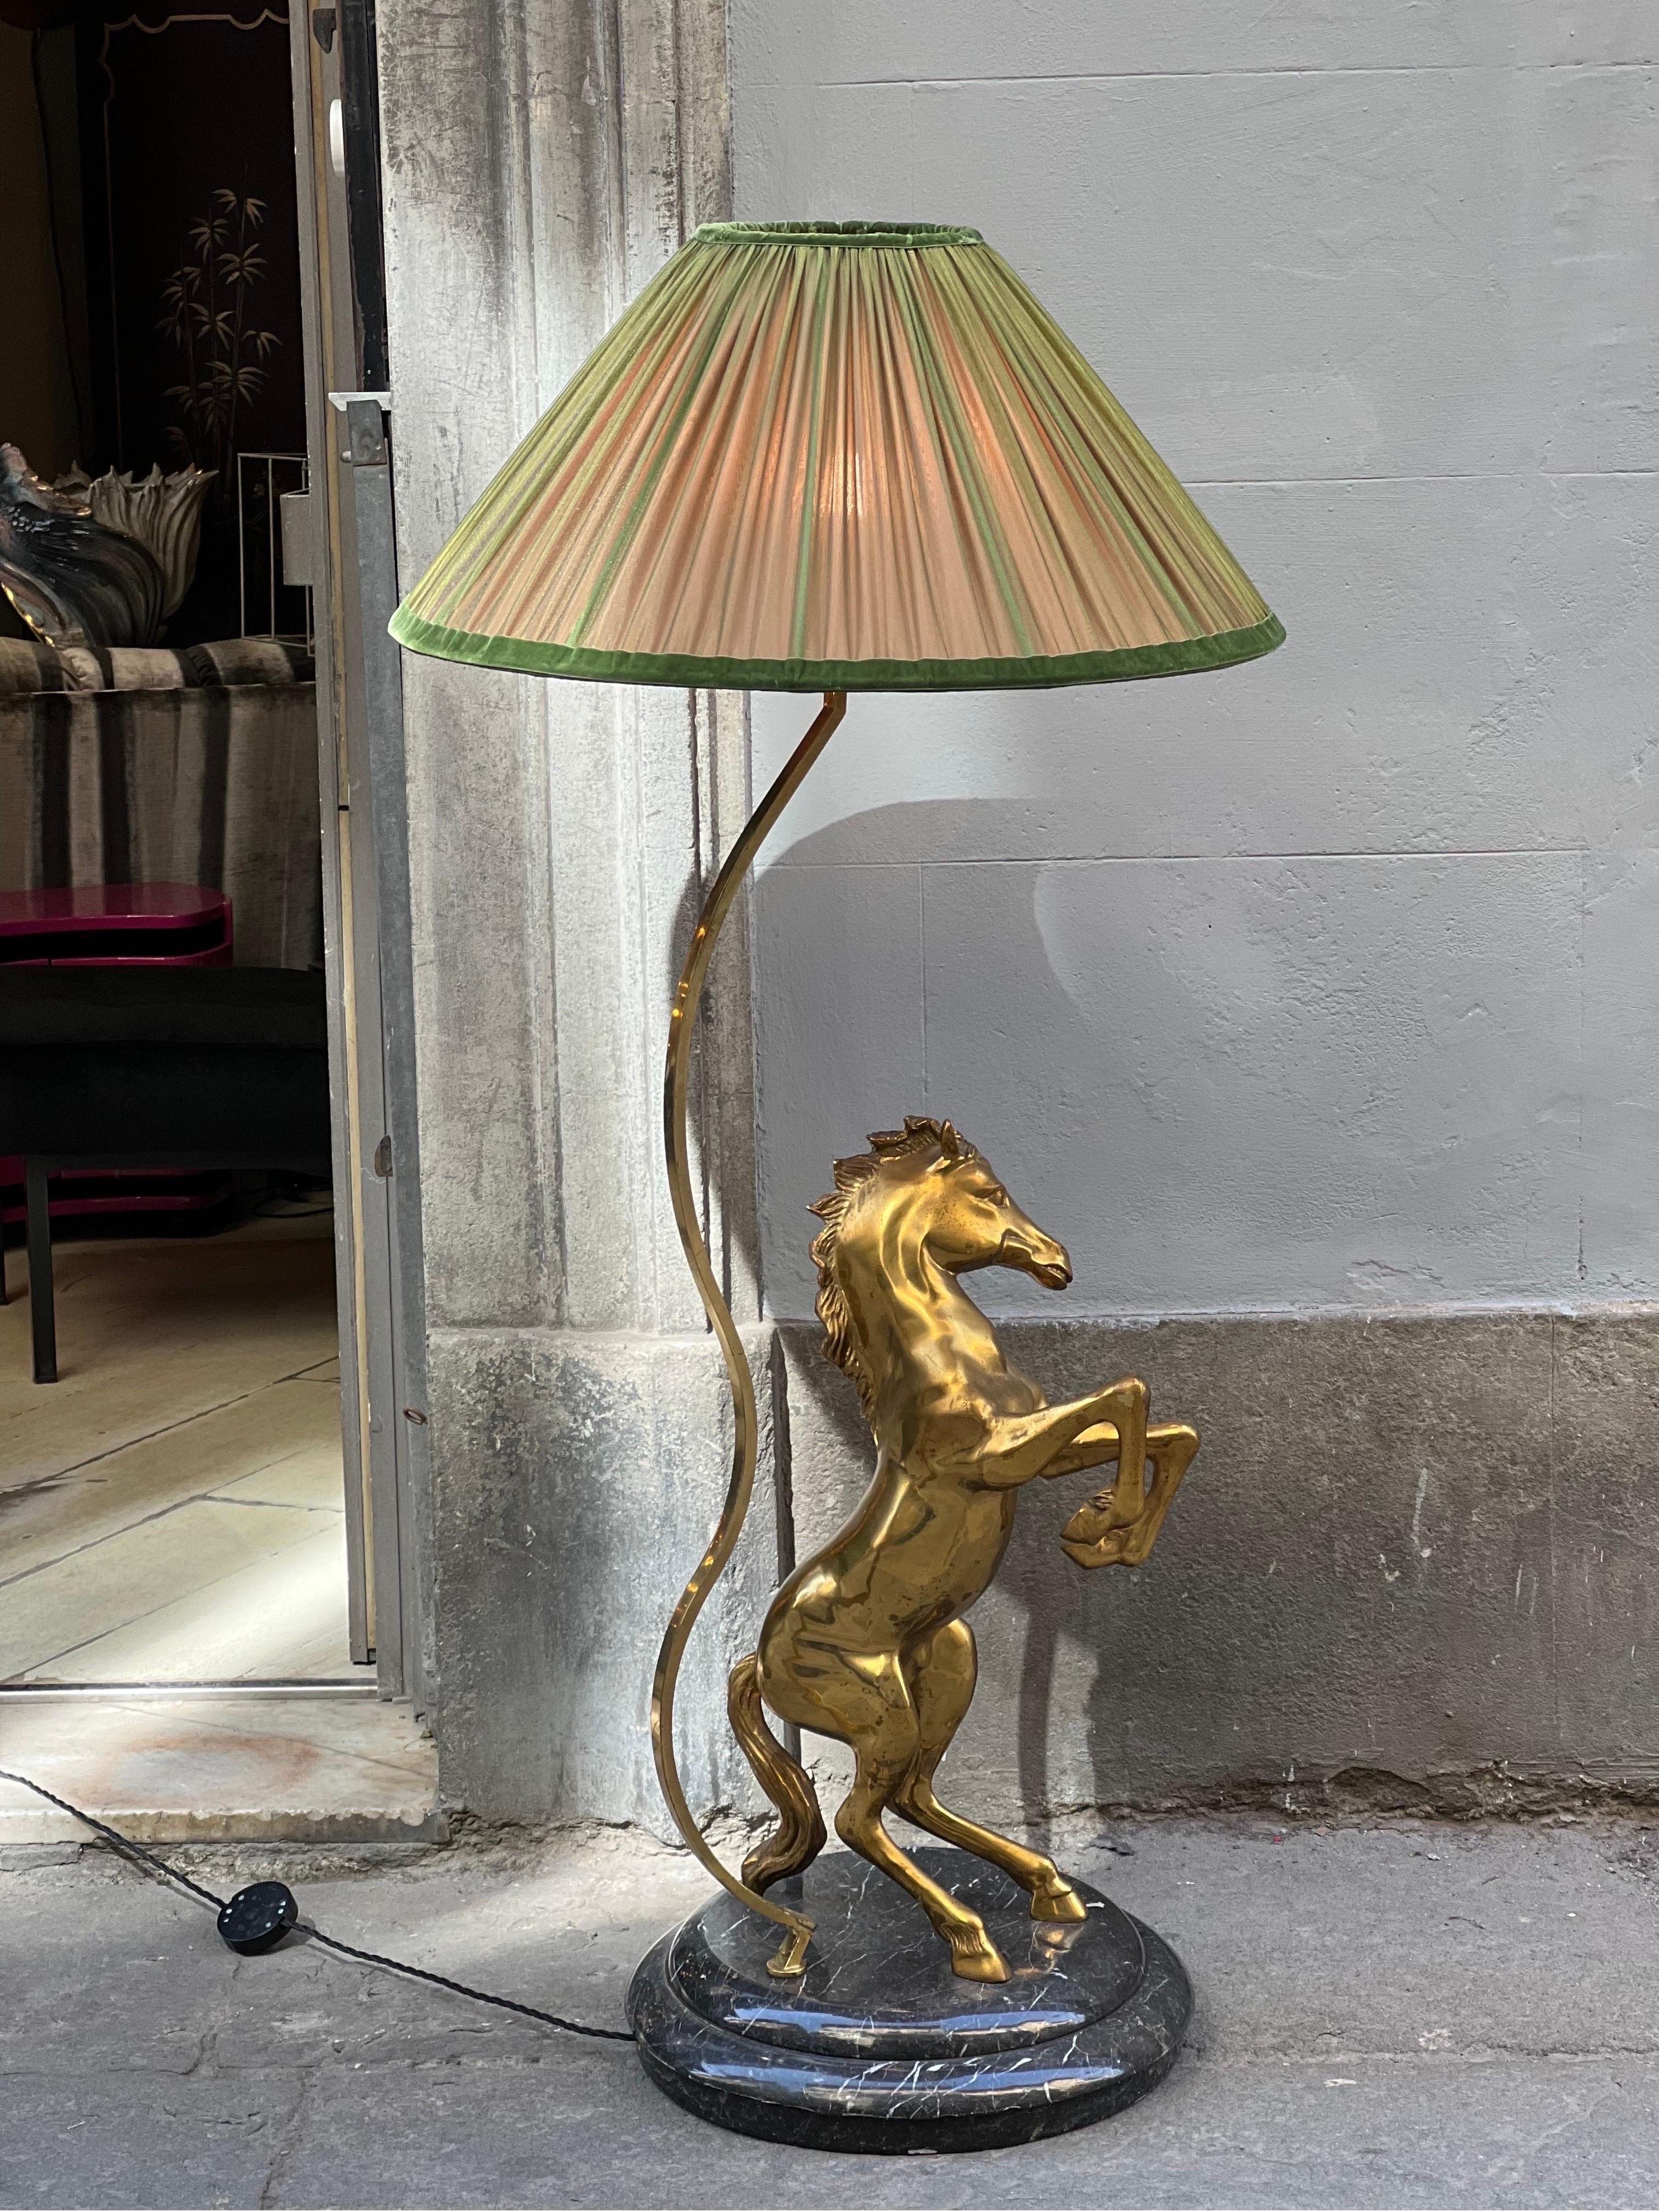 Vintage Italian bronze horse floor lamp with round marble base and our handcrafted lampshade.
The double-color lampshade is handmade in our internal laboratory using ruffled double-color silk chiffon bronze on the outside and green on the inside.